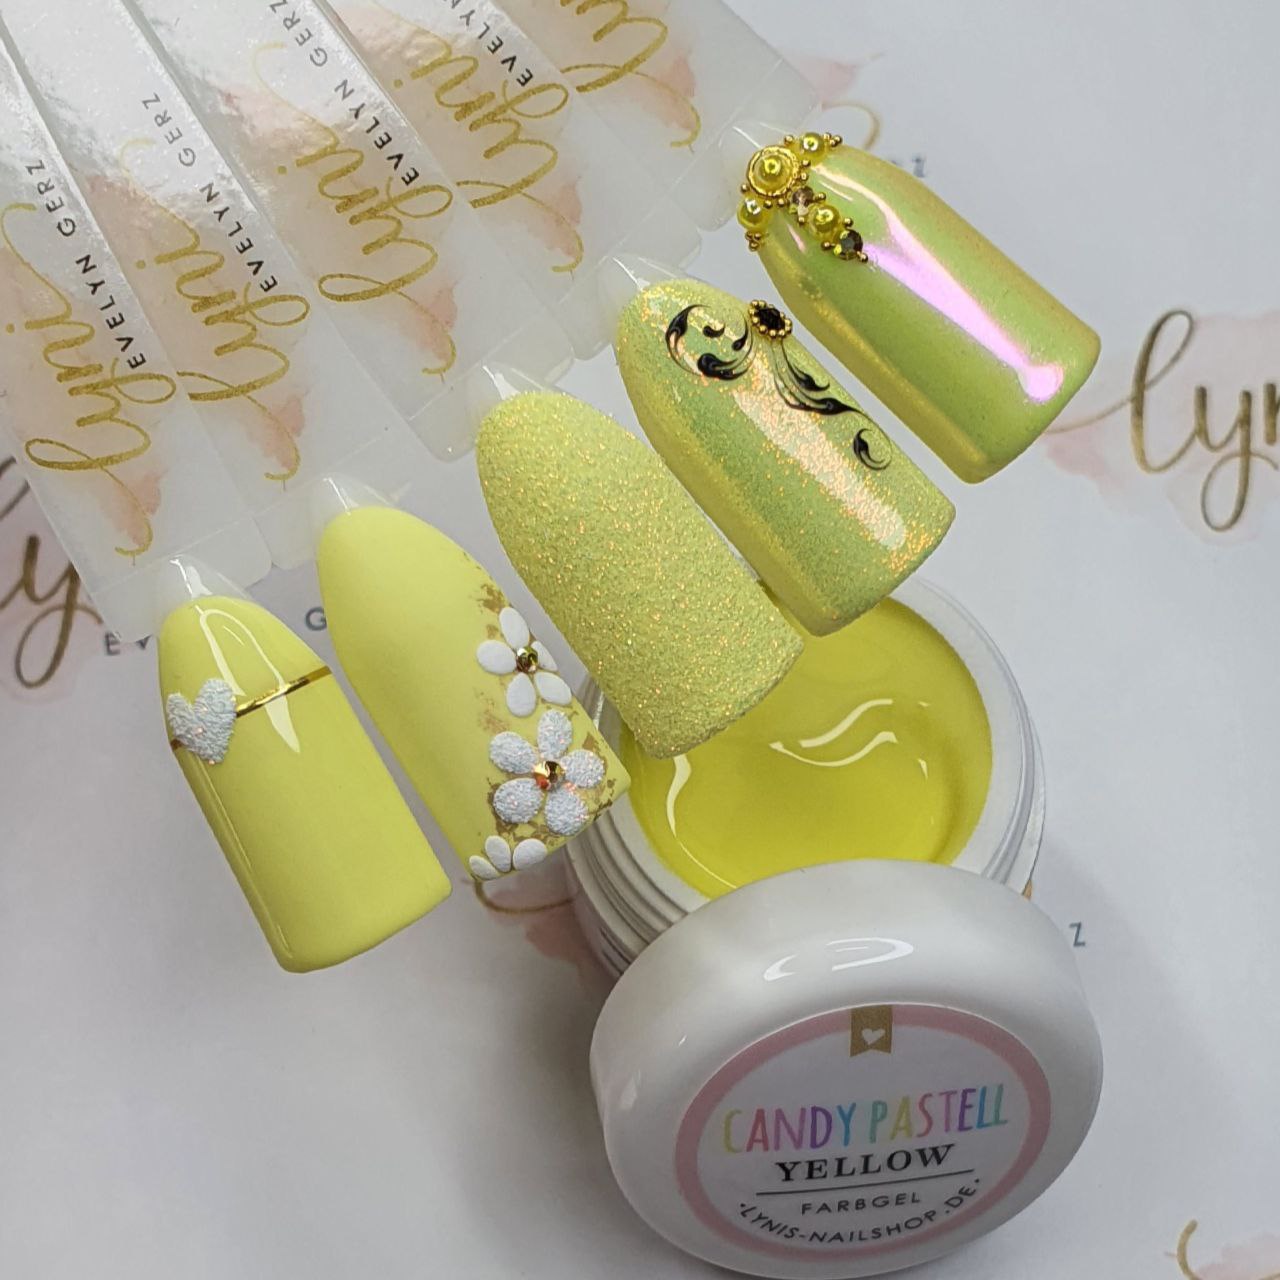 Candy Pastell Yellow · Farbgel 5ml*